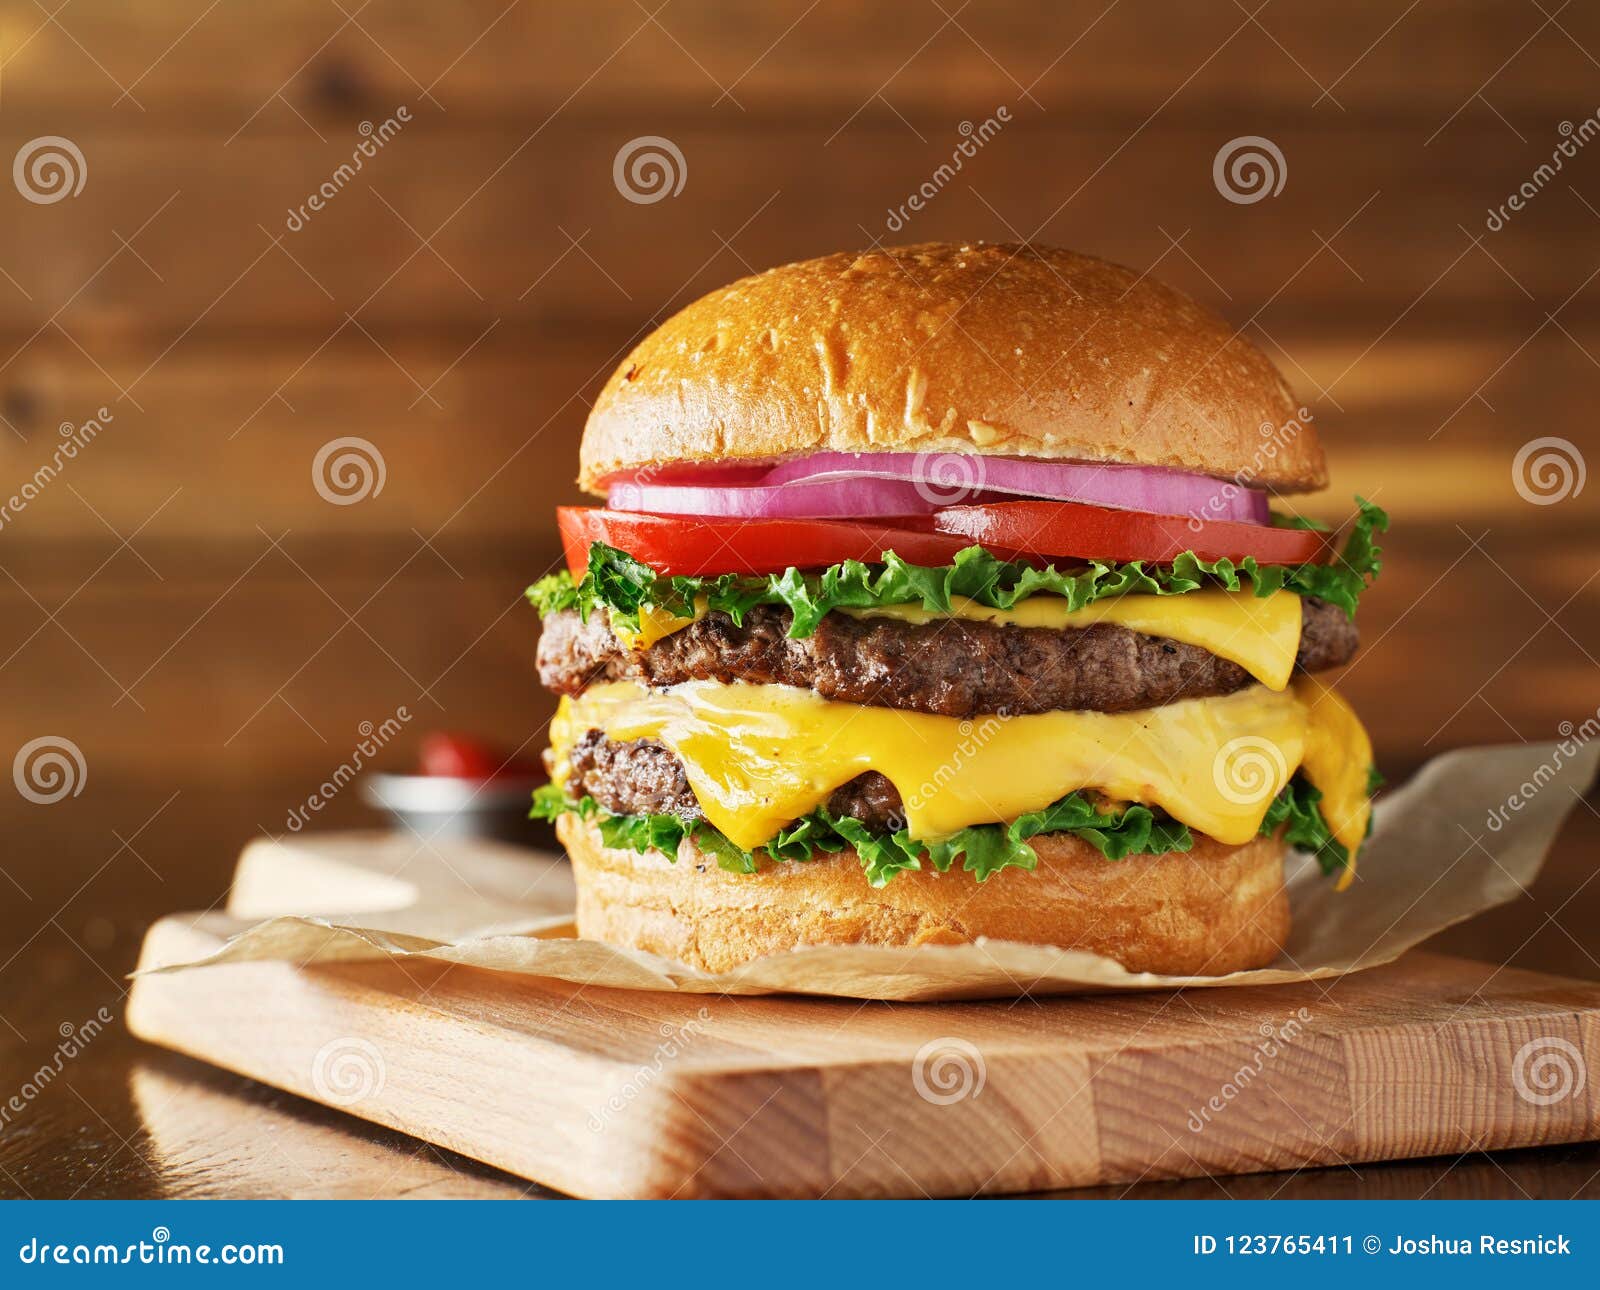 double cheeseburger with lettuce, tomato, onion, and melted american cheese